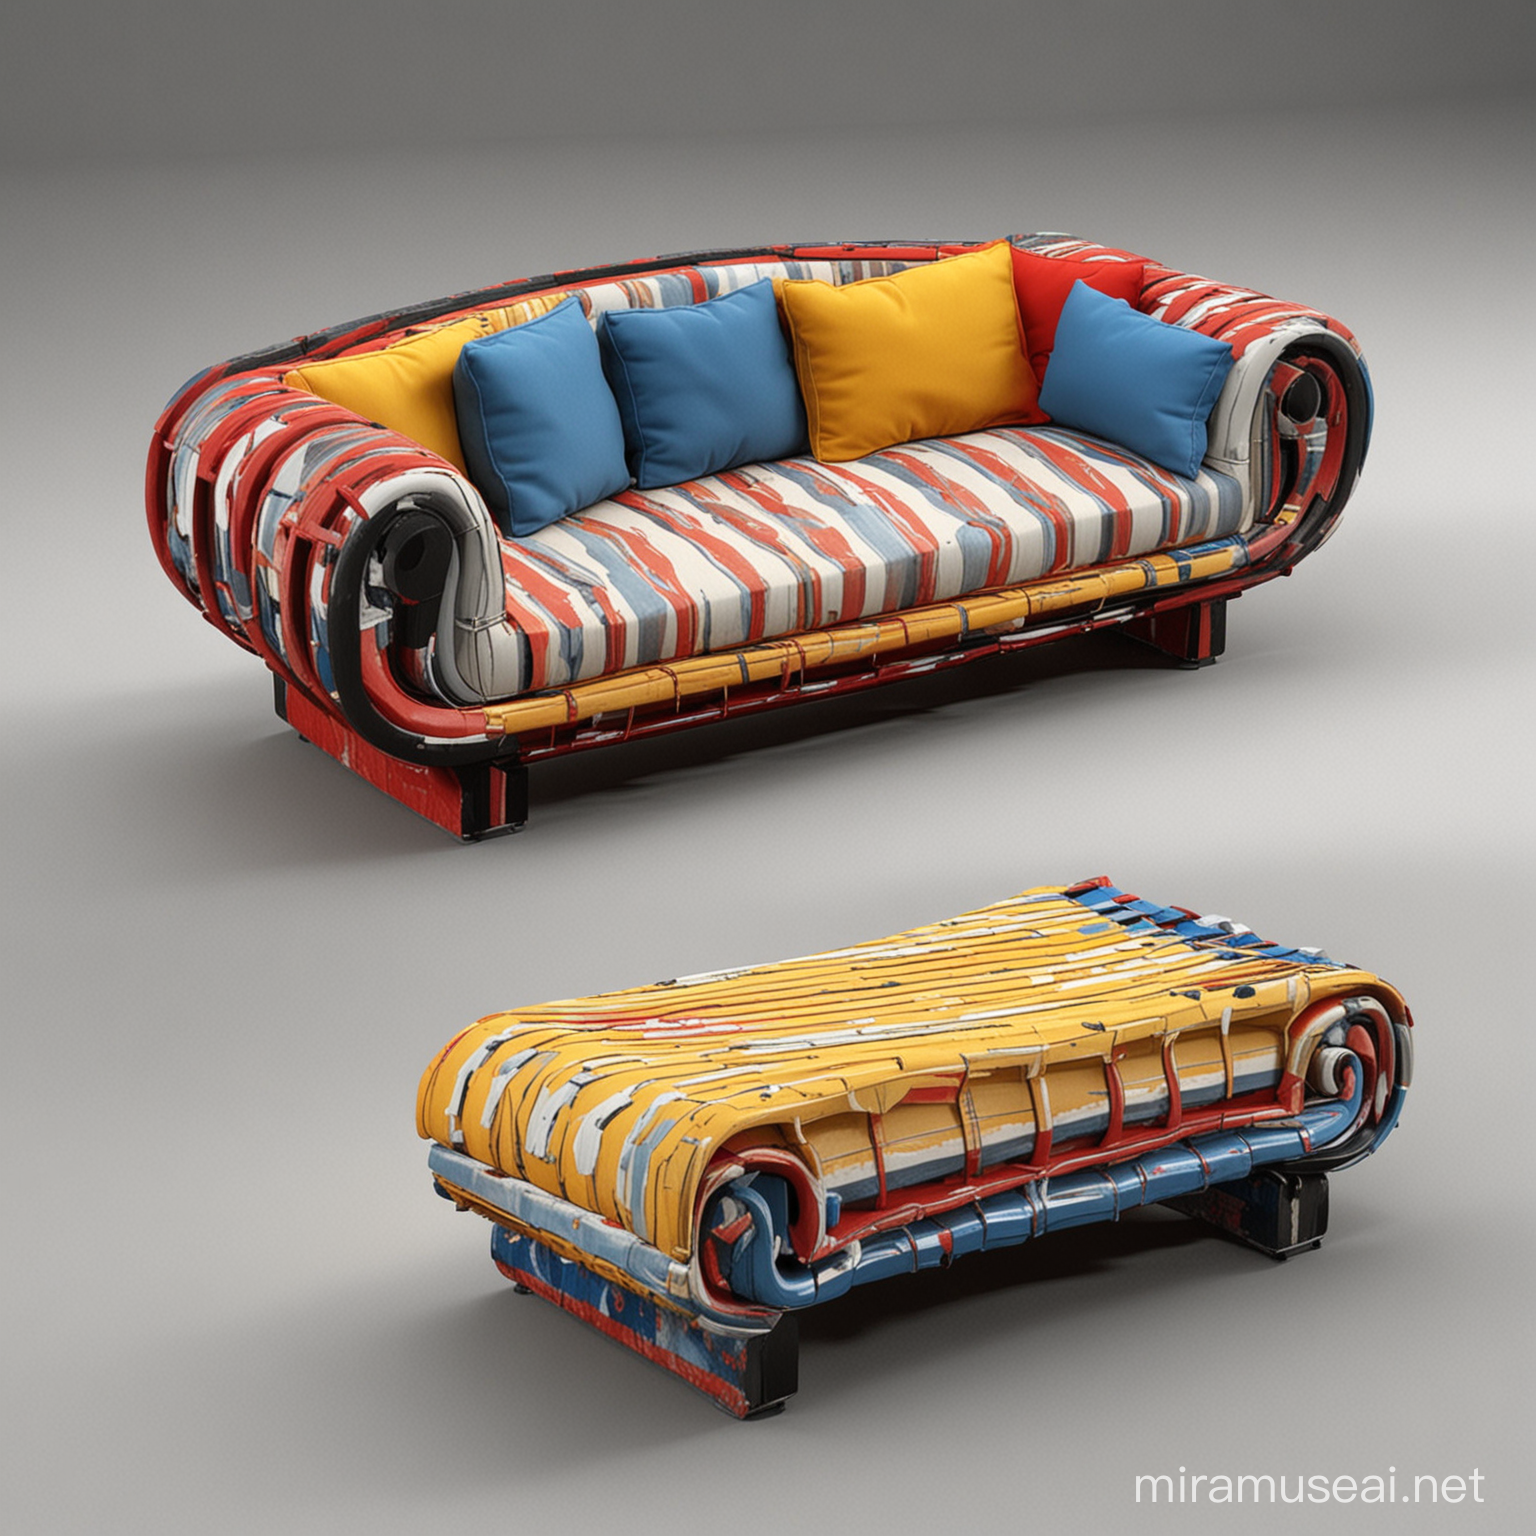 Design and make a render for a piece of mobile landscape furniture sofa woodand create projections for it, using the colors red, blue, yellow, black, and white, and creating simple curved lines.